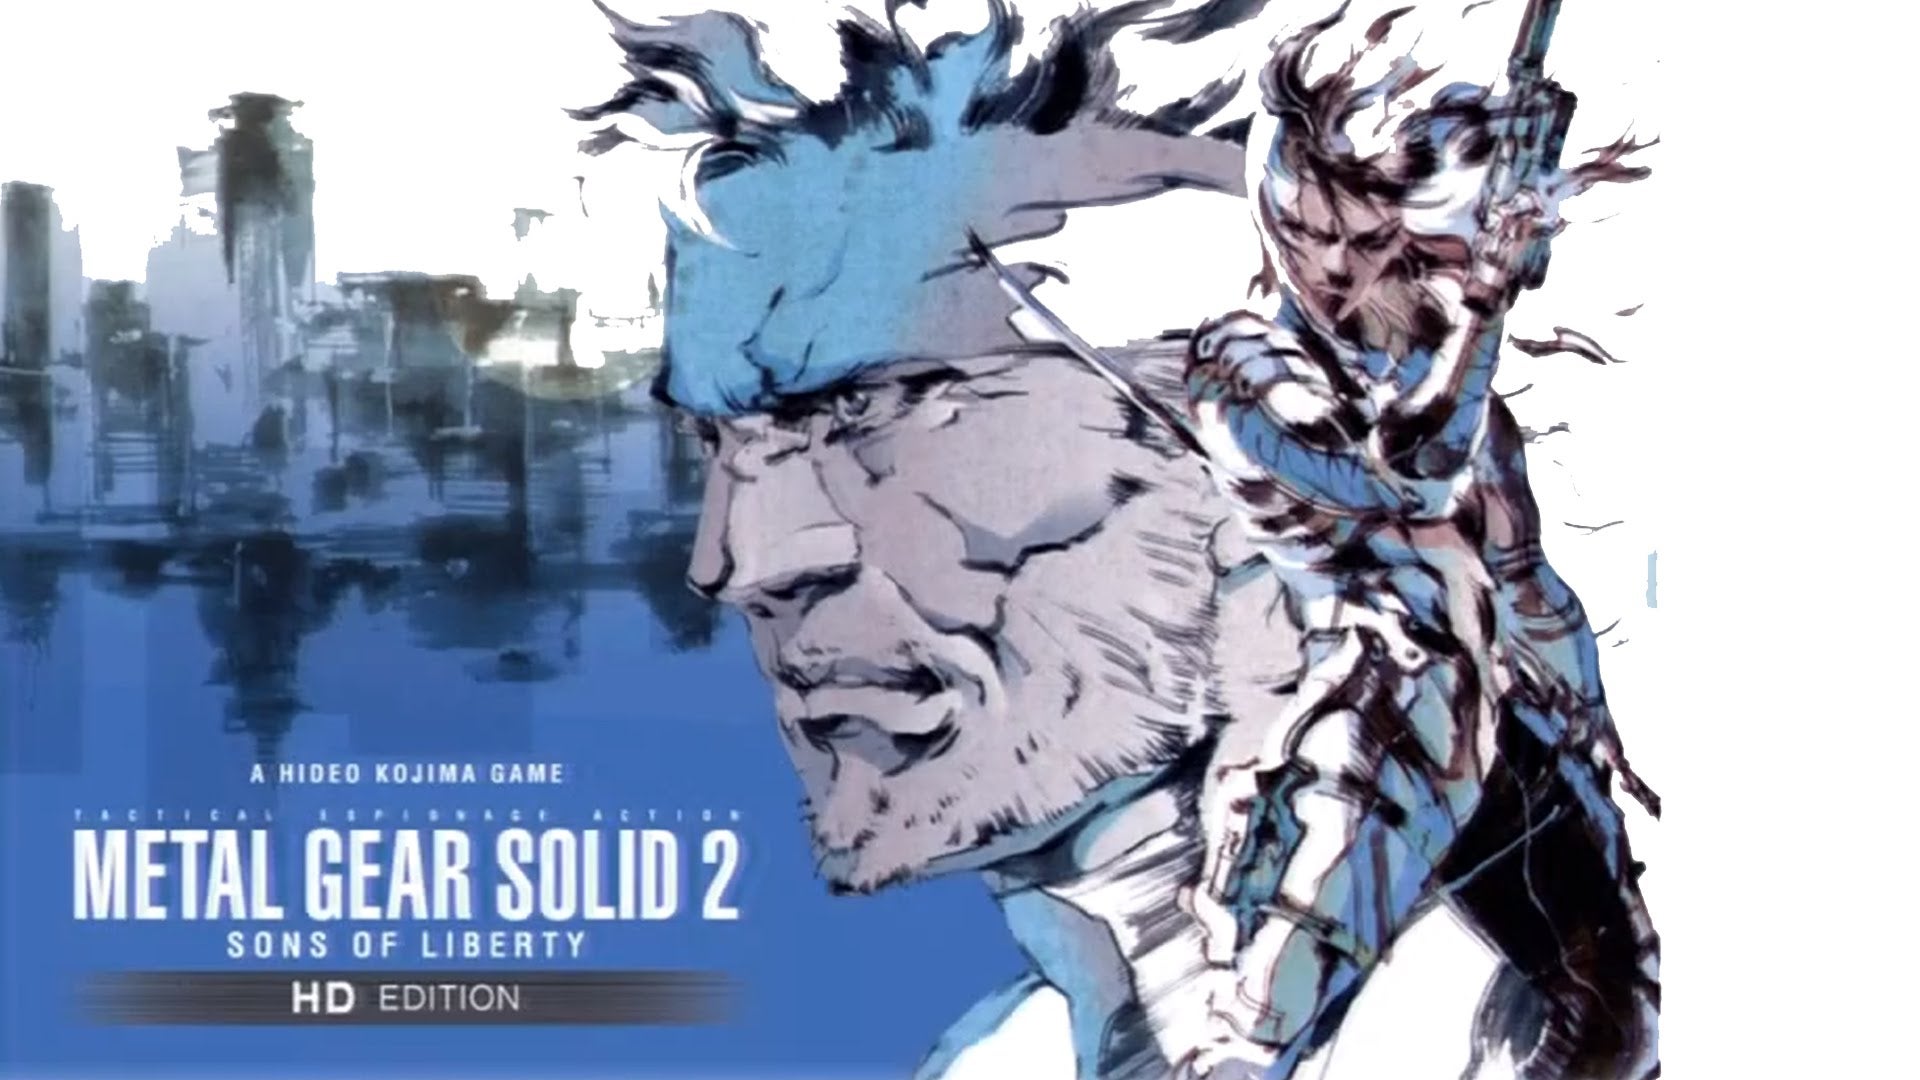 Image for Metal Gear Solid HD on Xbox One Back-Compat: The Best Way To Play?